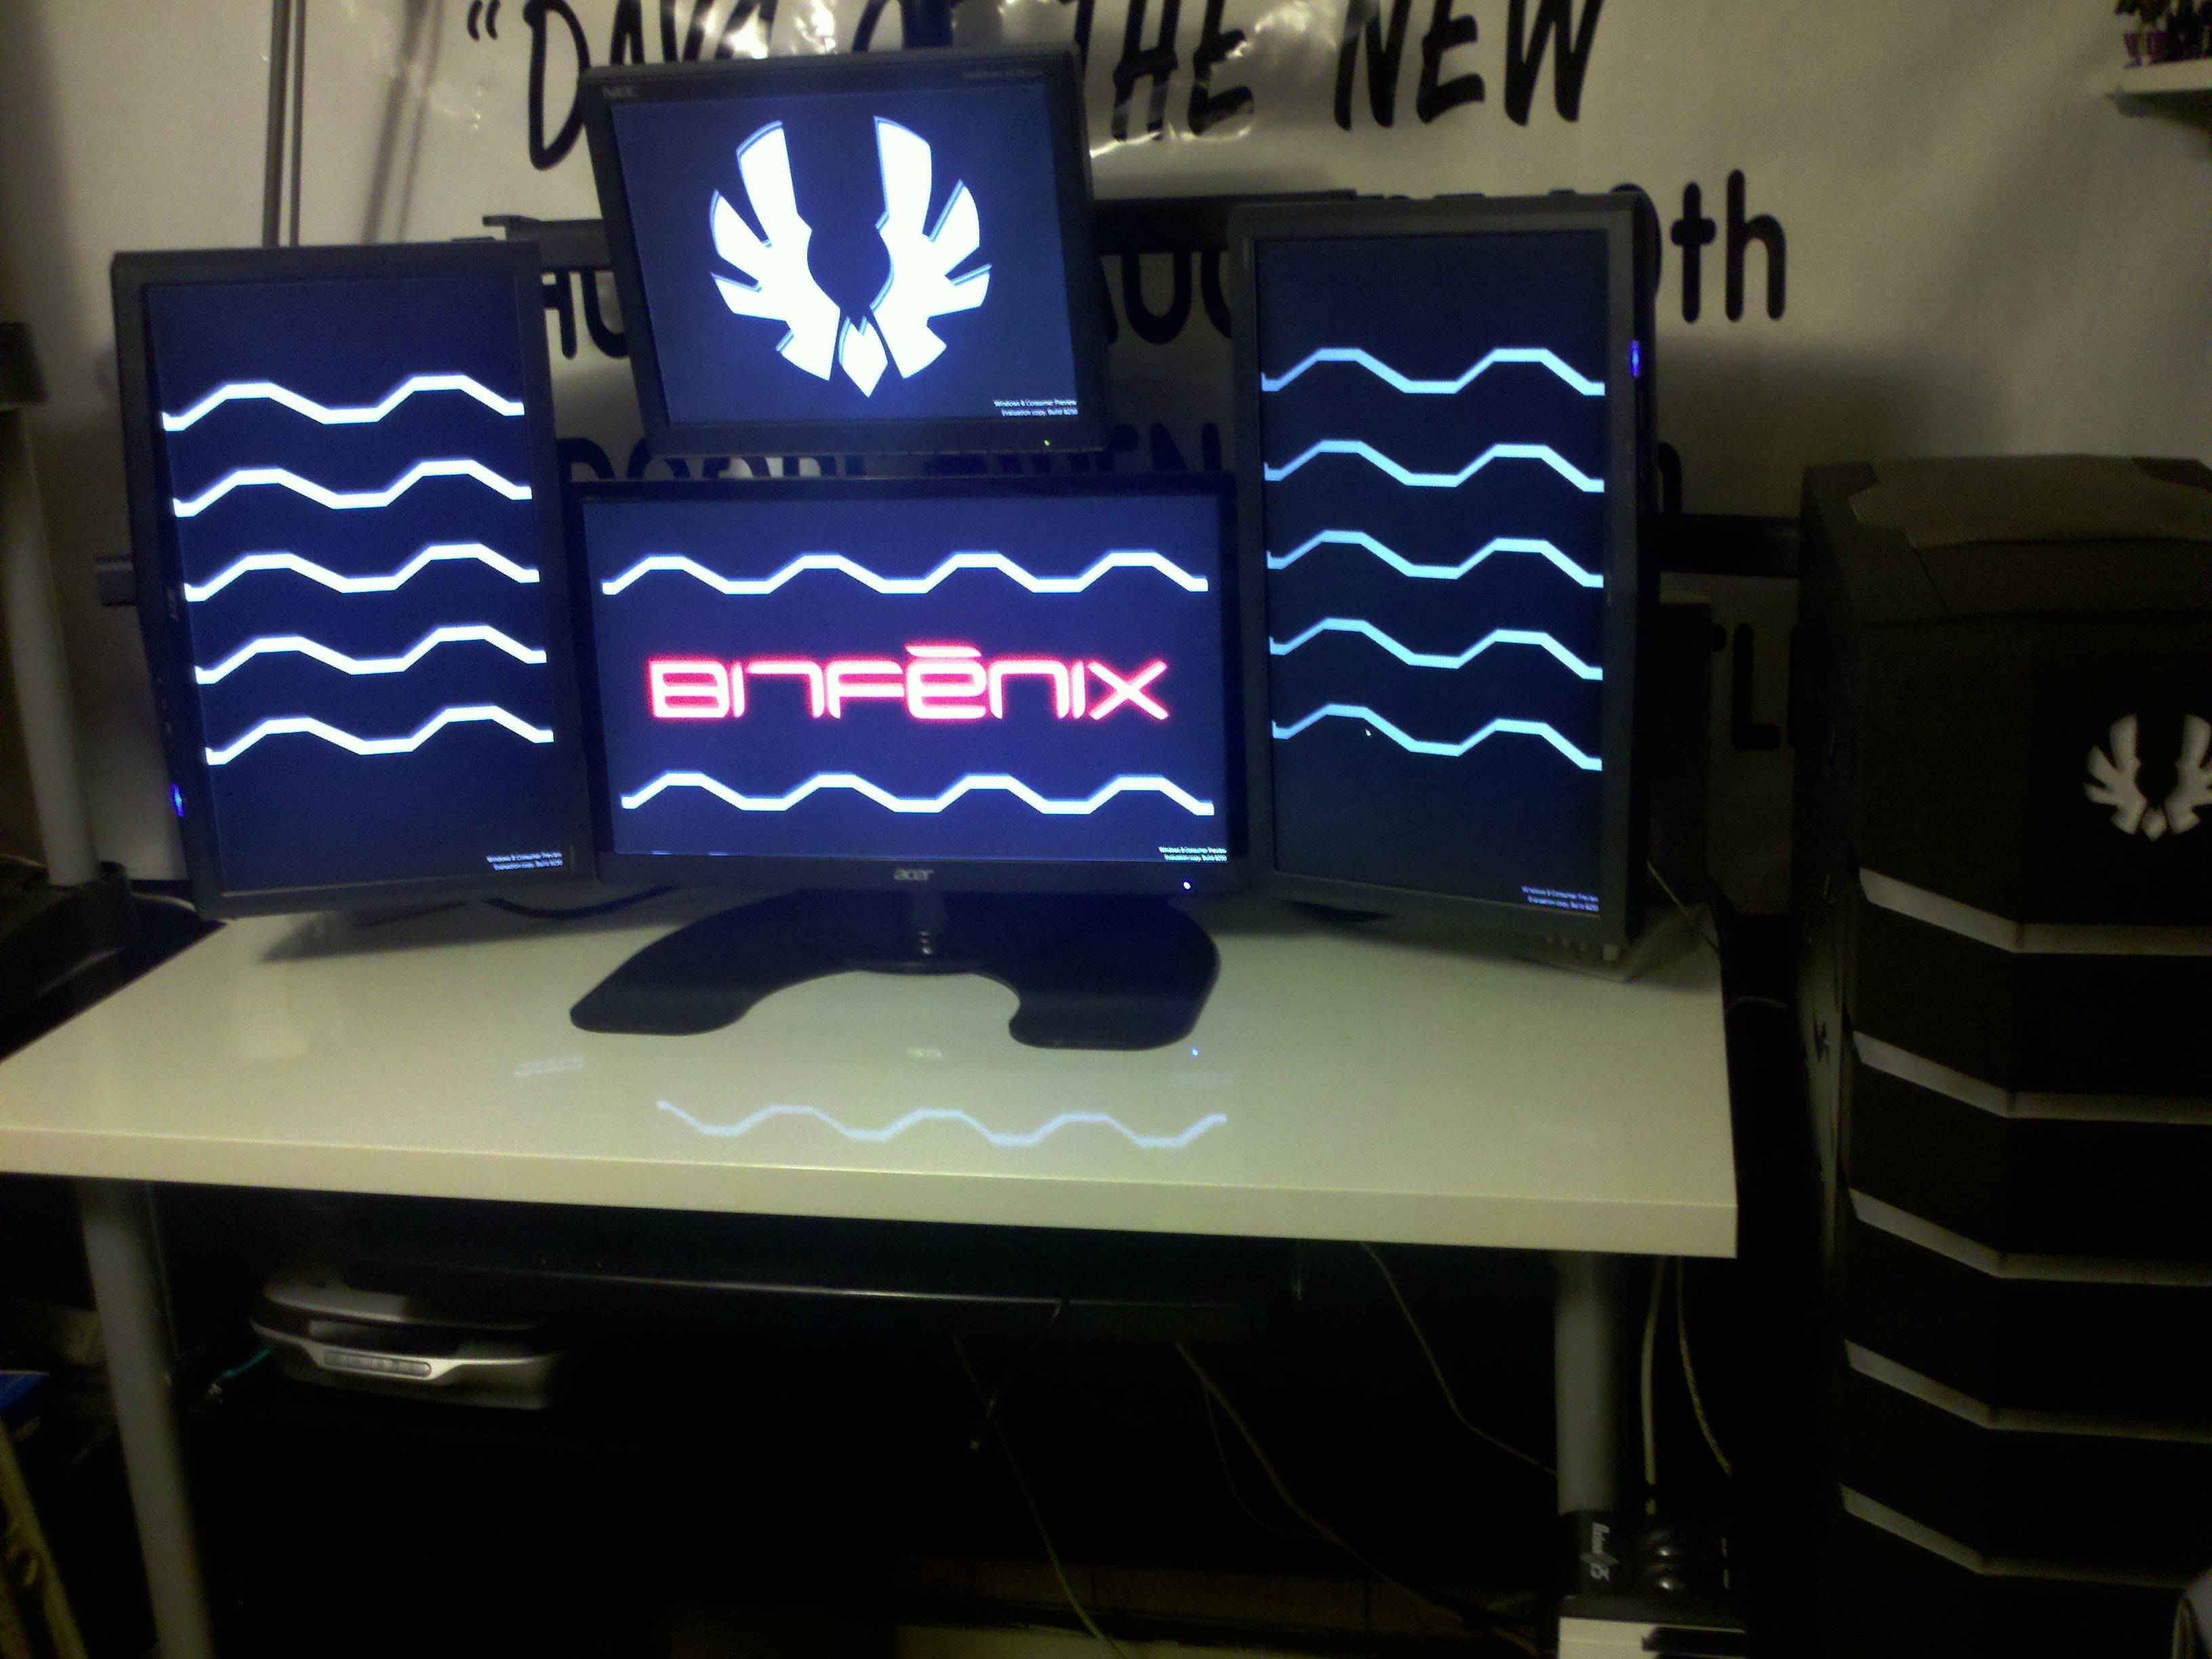  to make the BitFenix logo ion your wallpaper It looks really cool